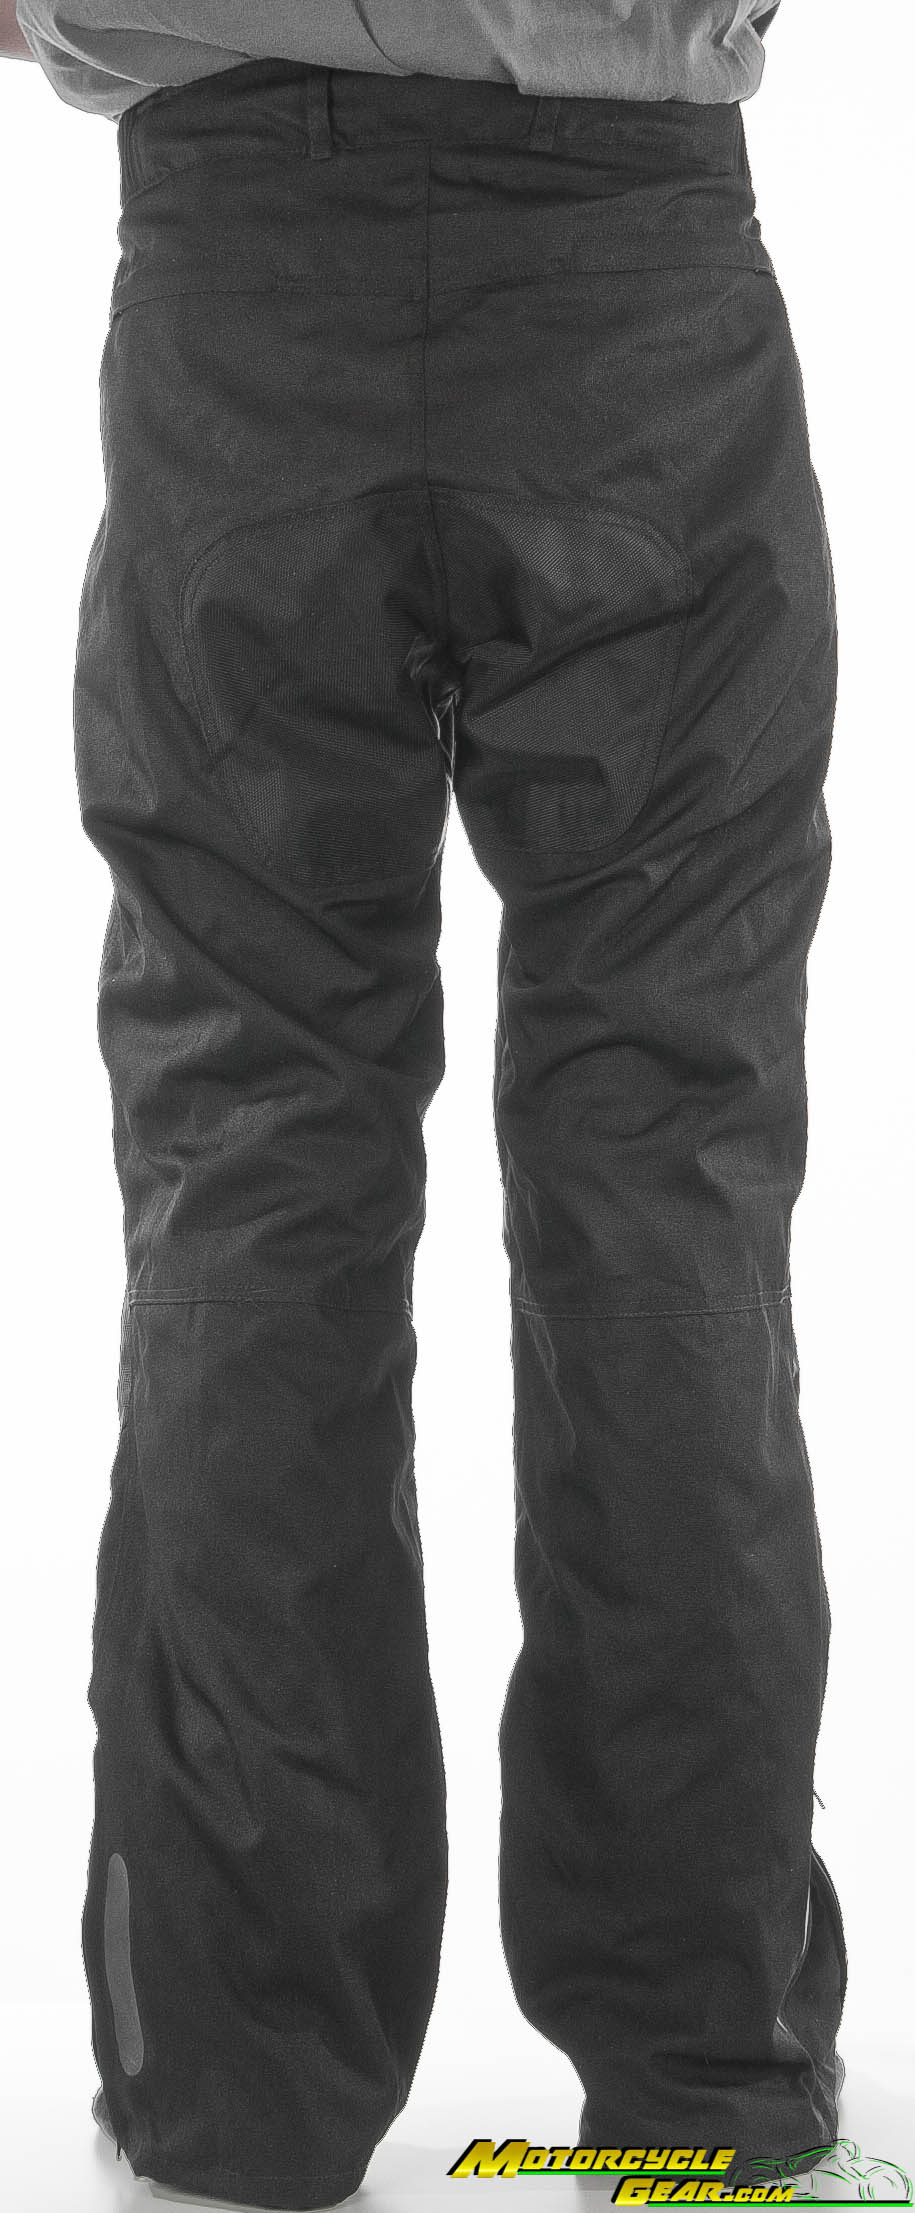 Viewing Images For Tourmaster Quest Pant :: MotorcycleGear.com